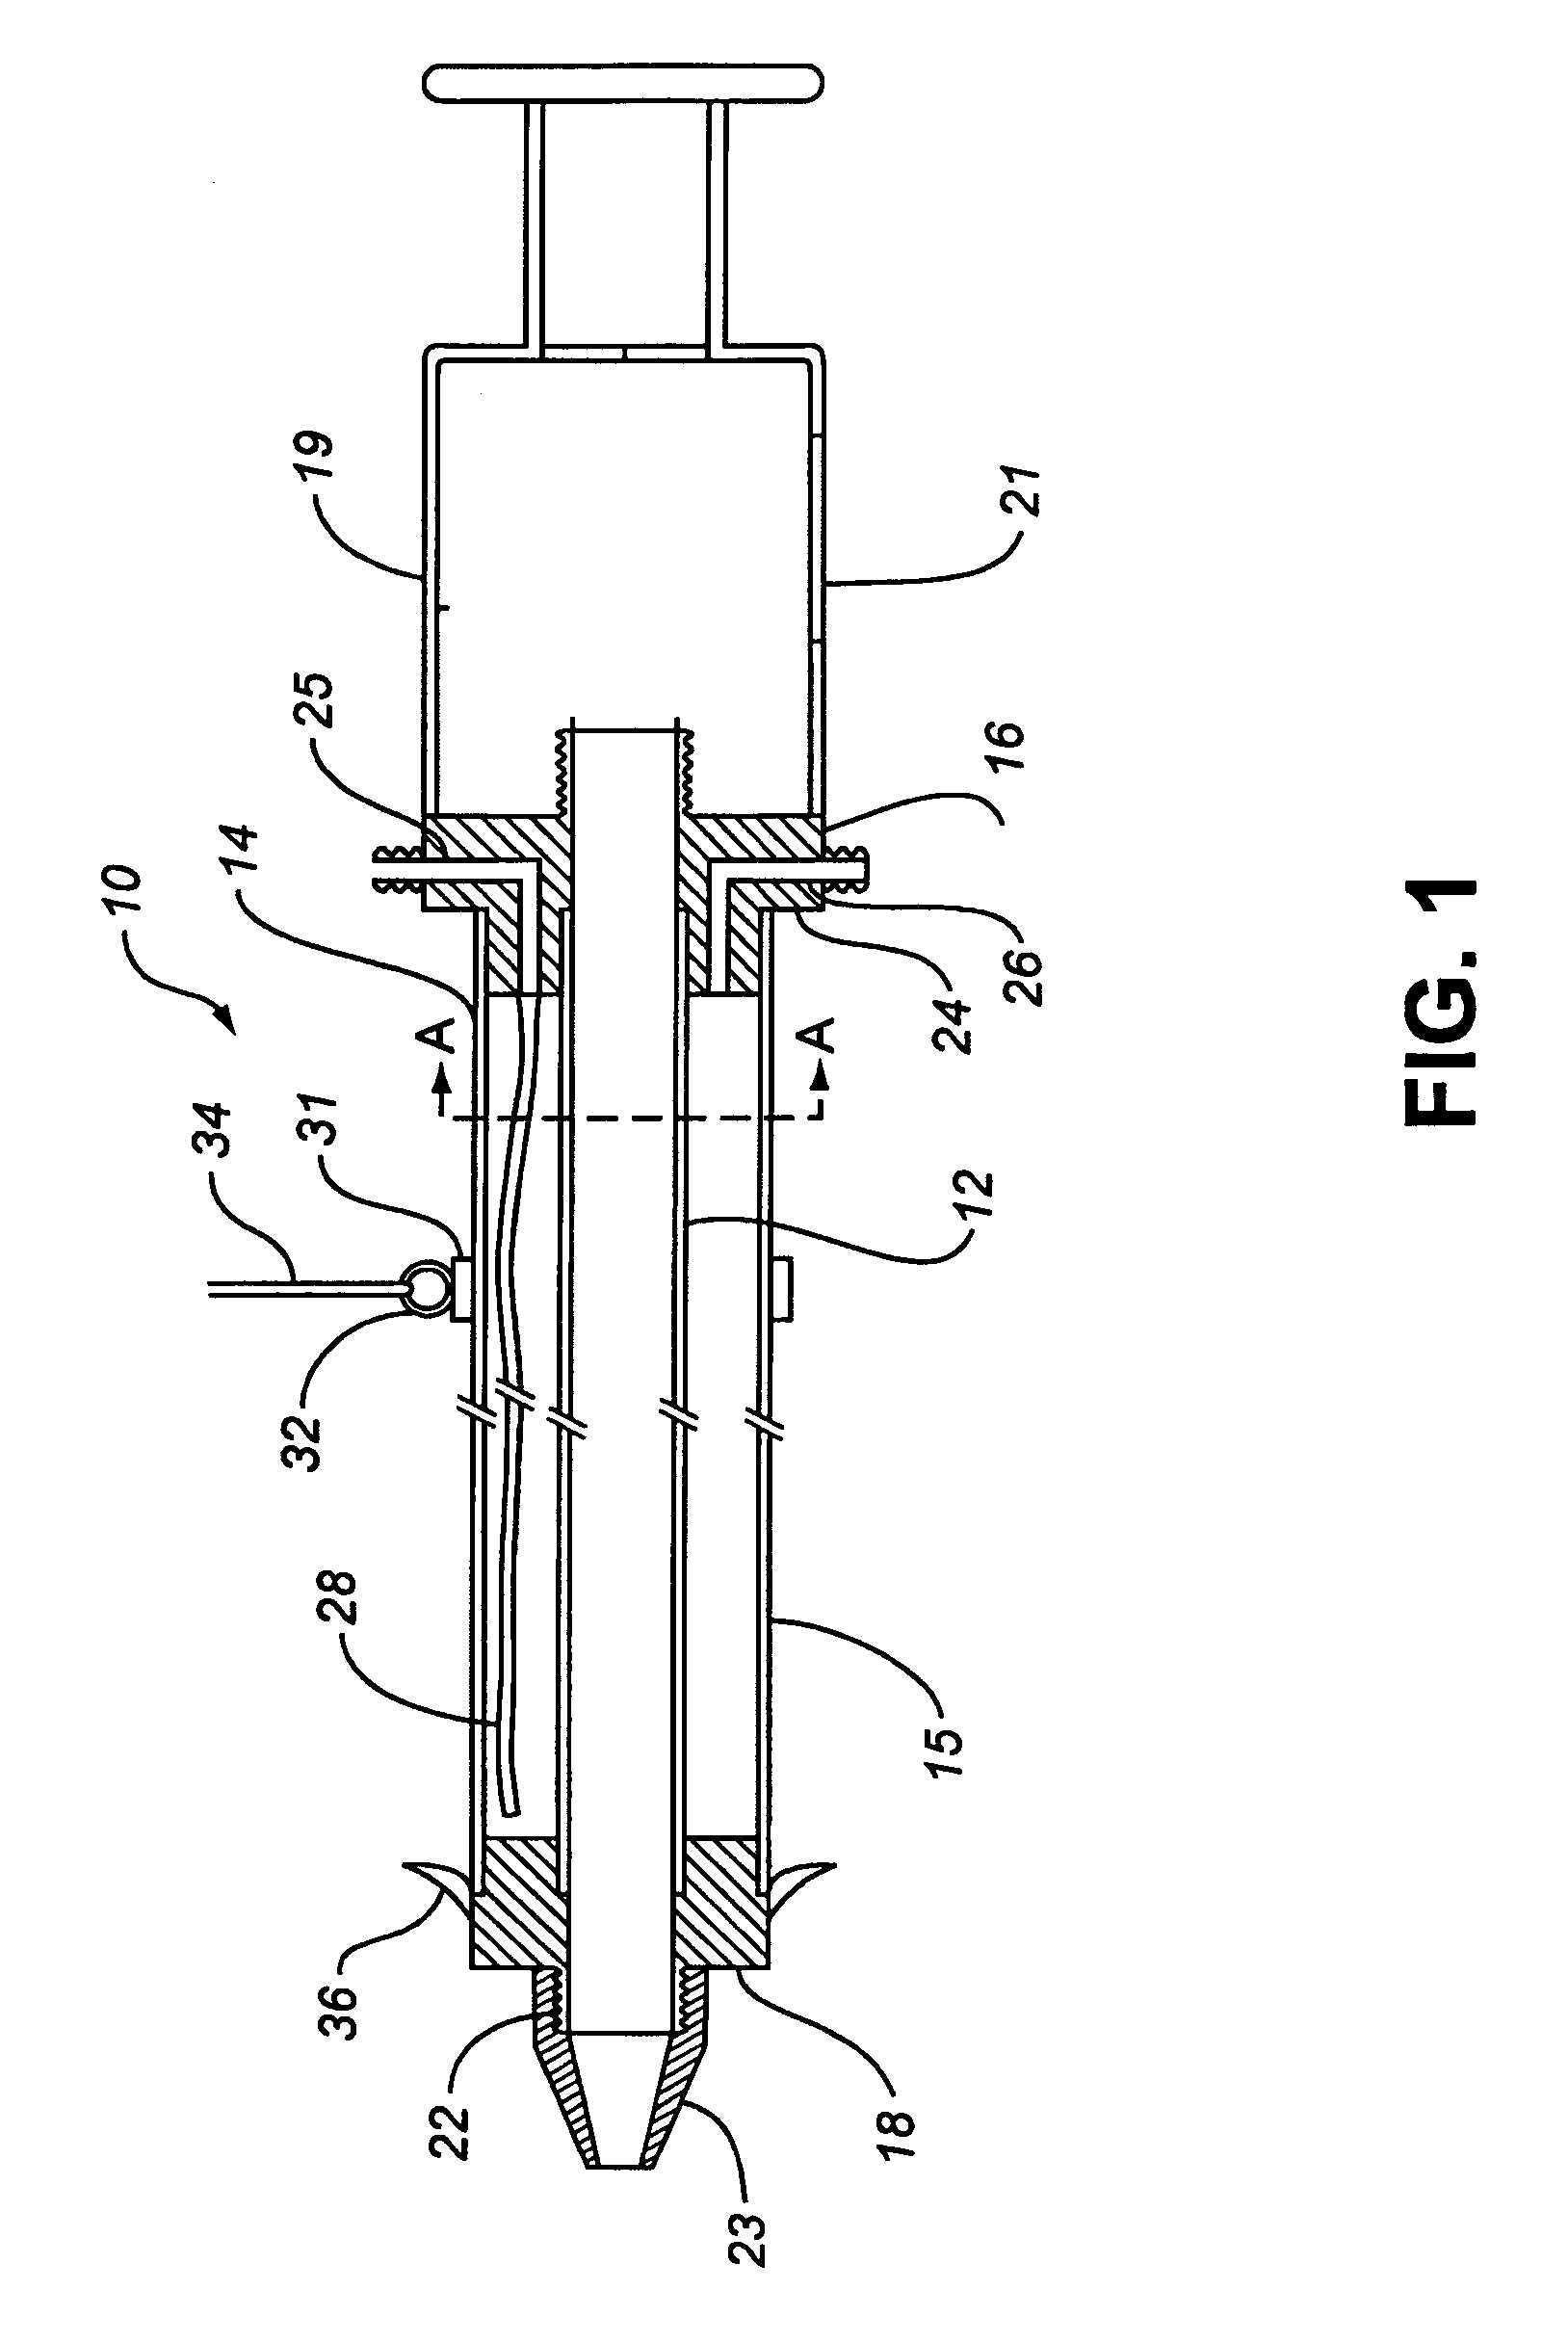 Dry ice blasting cleaning apparatus